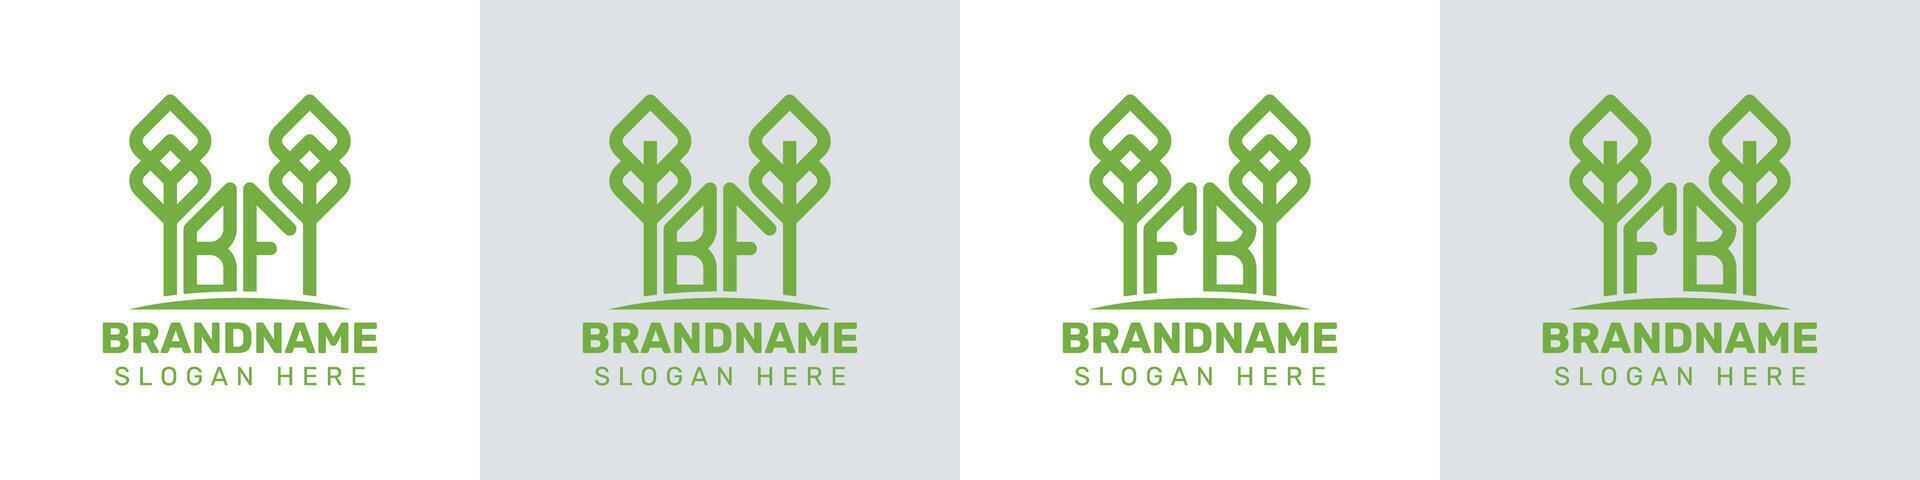 Letters BF and FB Greenhouse Logo, for business related to plant with BF or FB initials vector